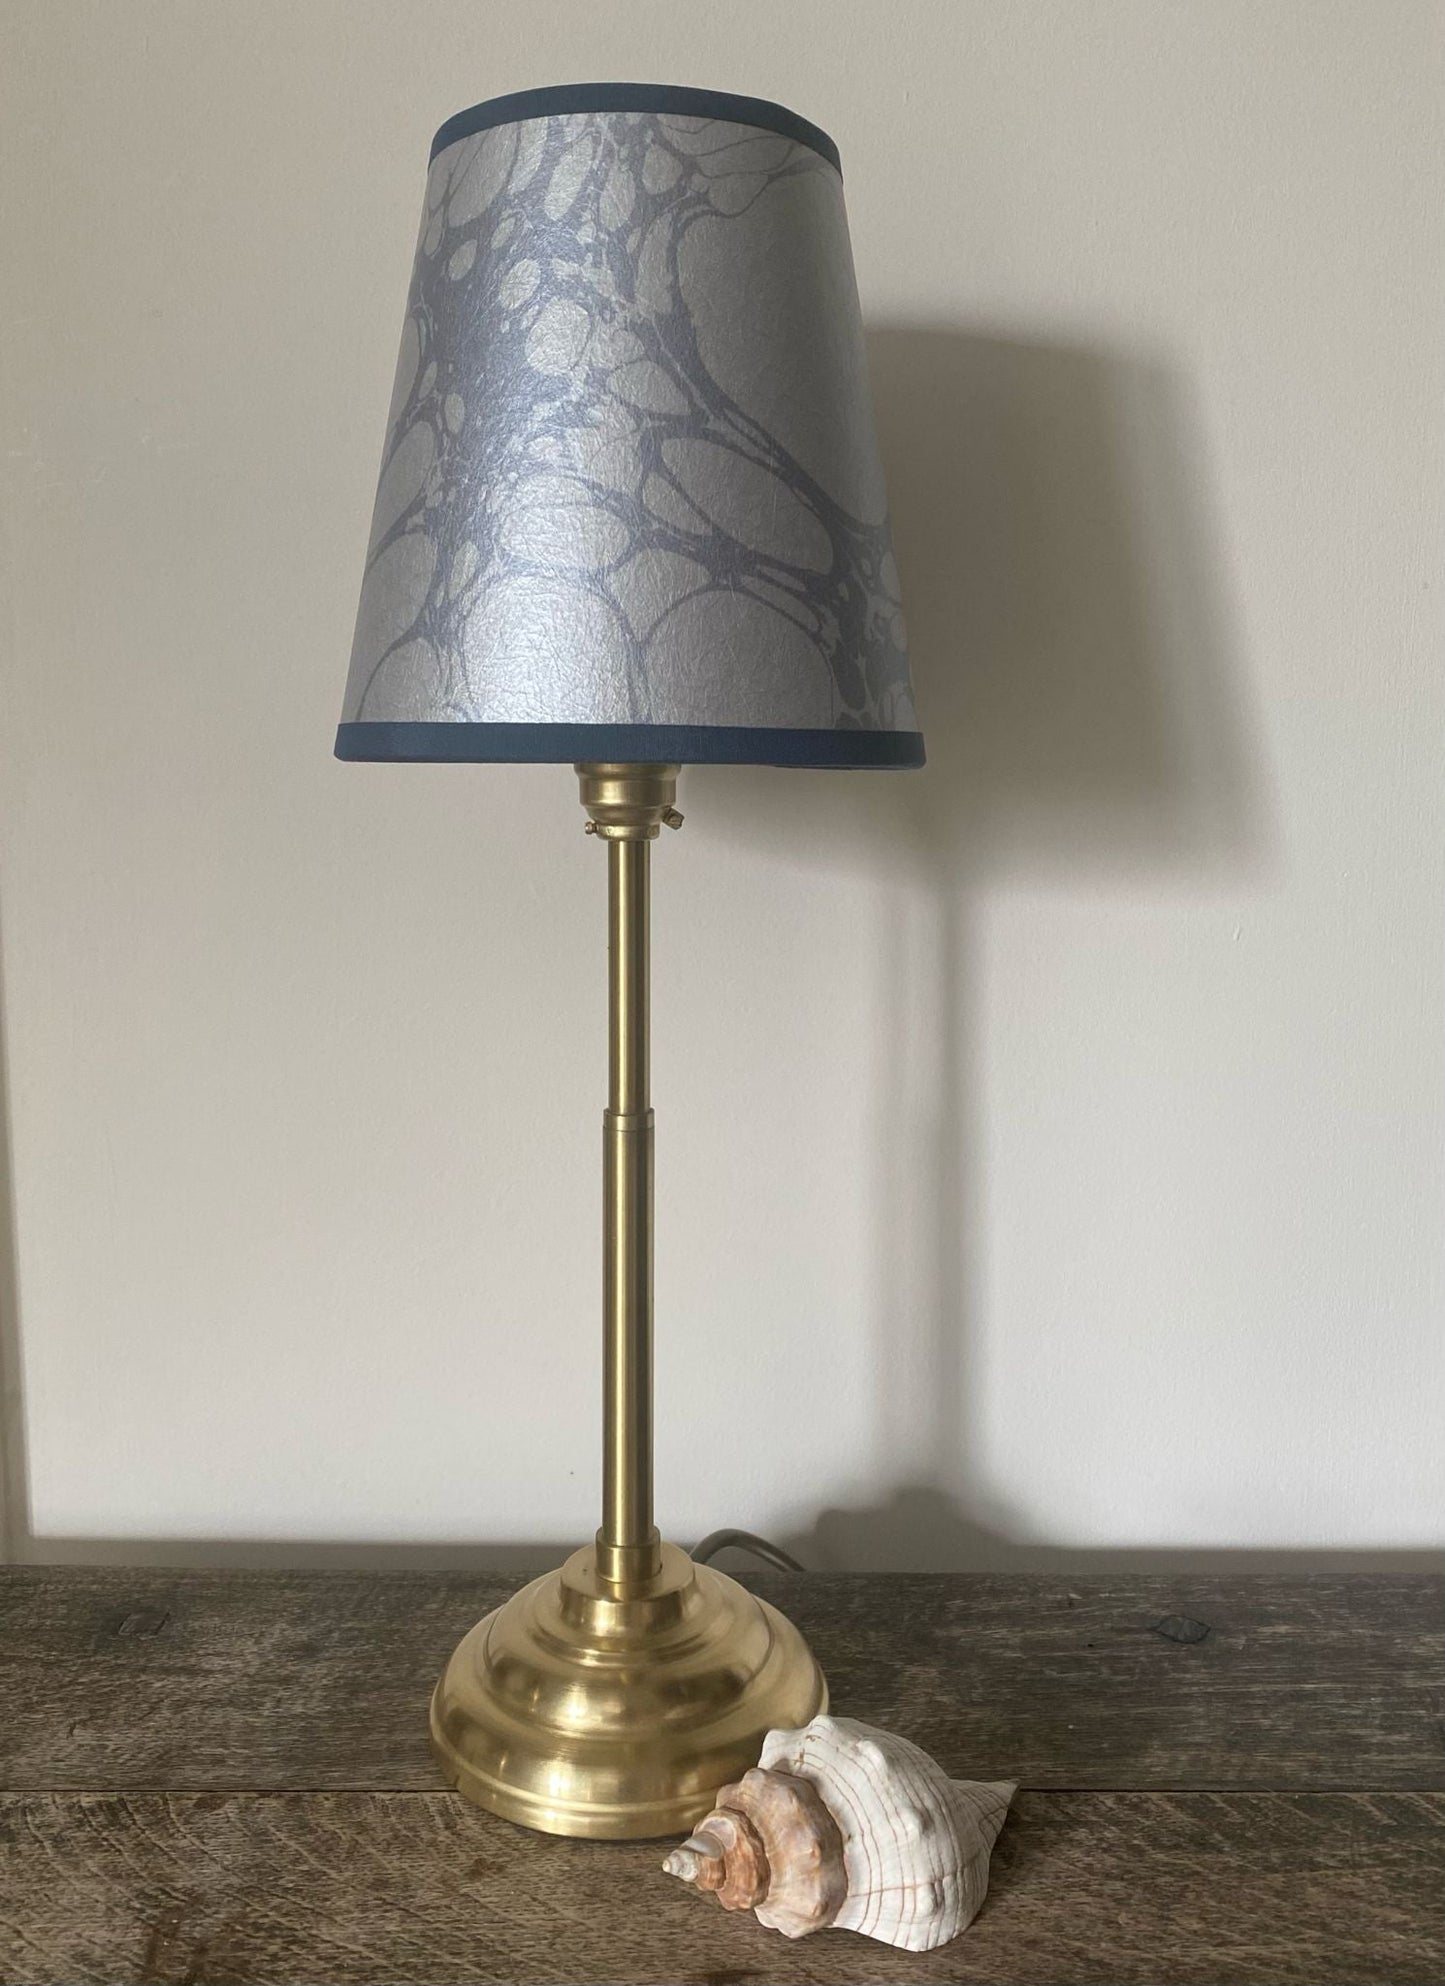 House of Amitié Marbled Paper Lampshade - Moucheté Sea Holly - Empire - Size Small - House of Amitiéproduct_type#LAM - WP - 003 - LBF